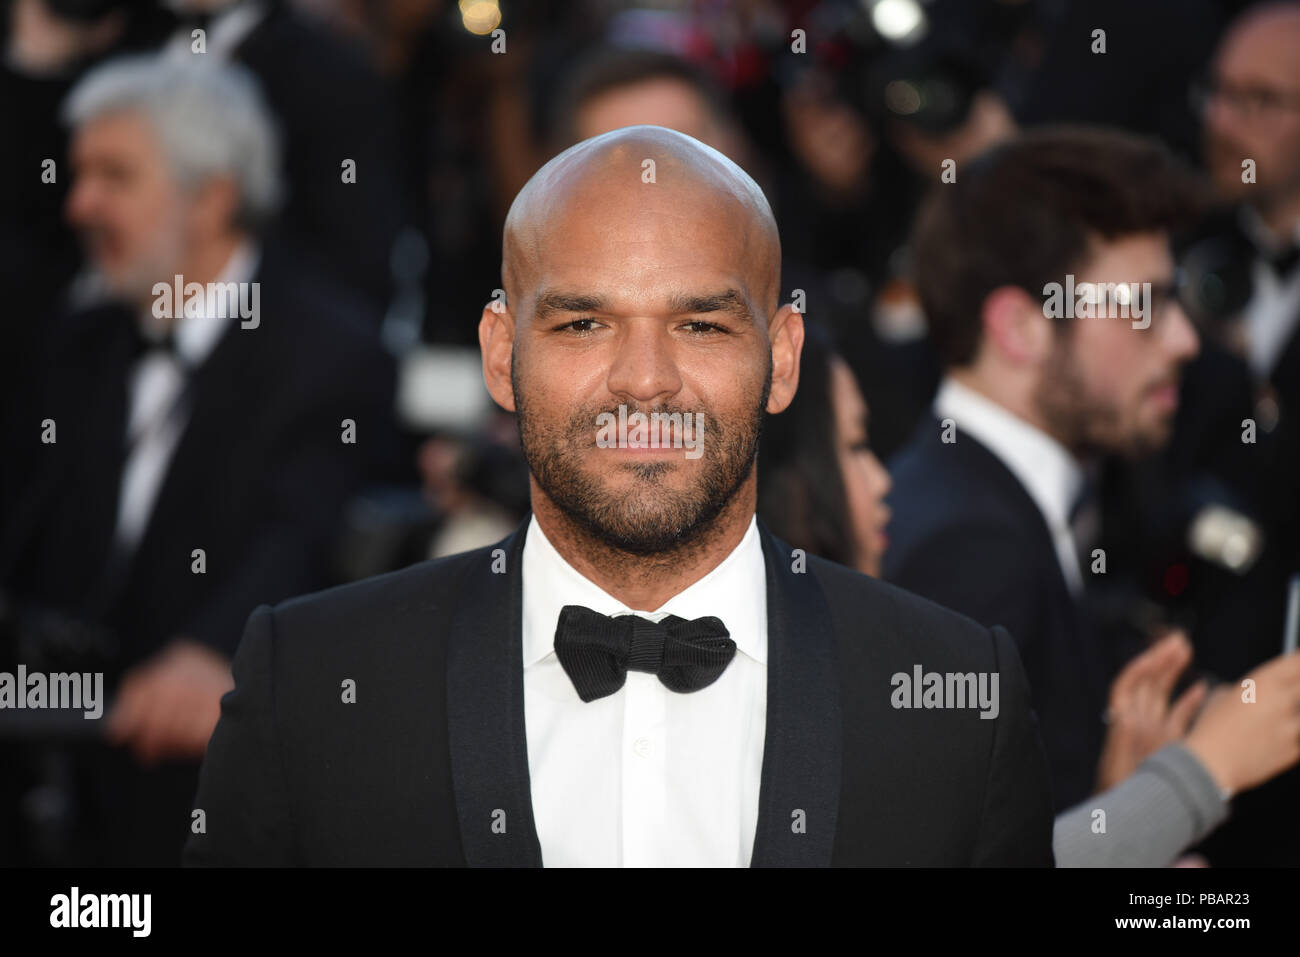 May 15, 2016 - Cannes, France: Amaury Nolasco attends the 'Mal de Pierres' premiere during the 69th Cannes film festival.  Amaury Nolasco lors du 69eme Festival de Cannes. *** FRANCE OUT / NO SALES TO FRENCH MEDIA *** Stock Photo